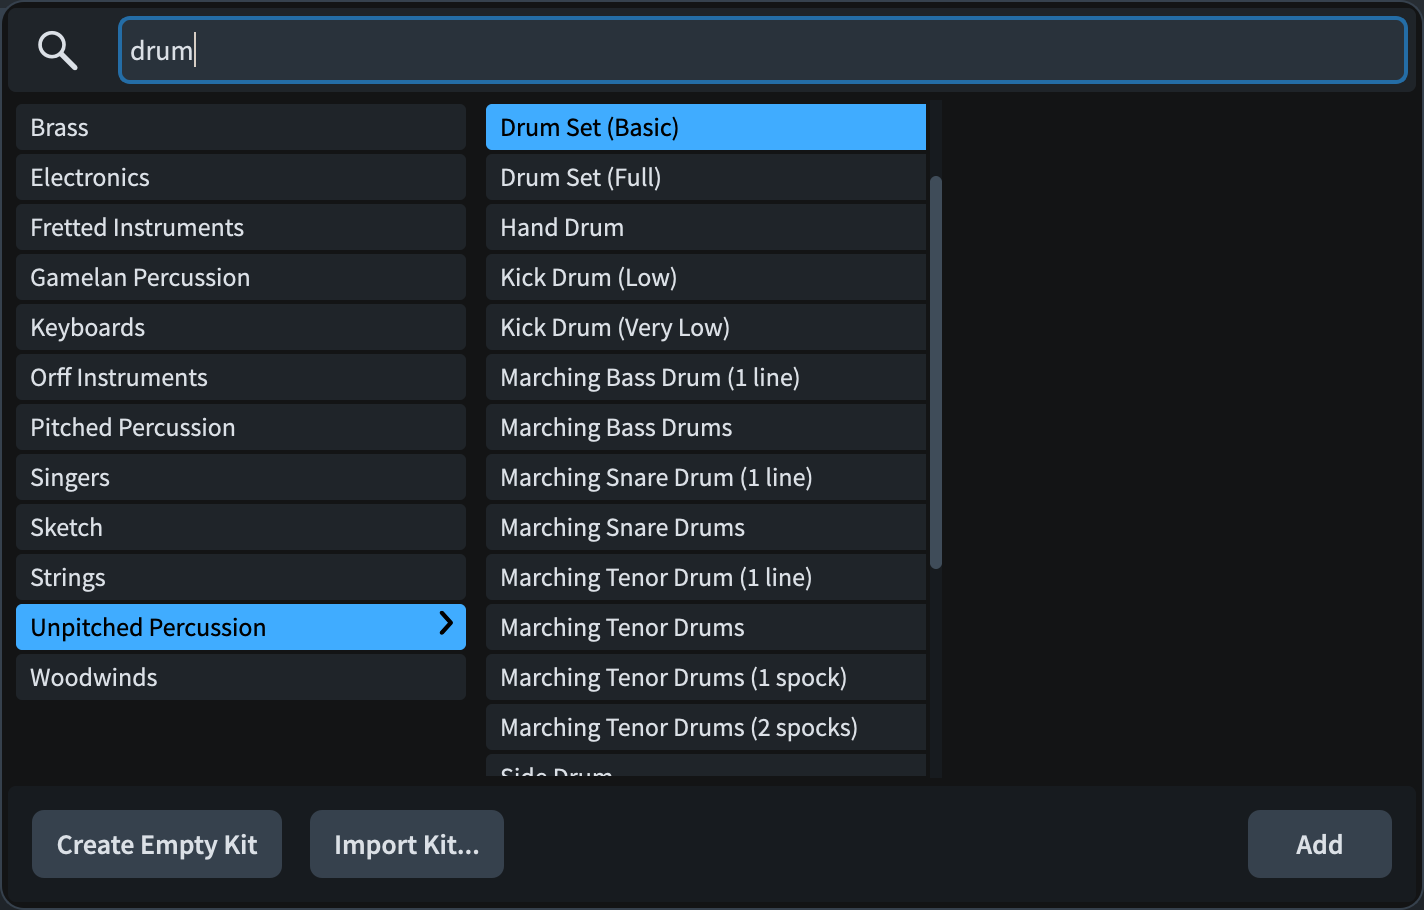 Instrument picker filtered by the search term "drum"